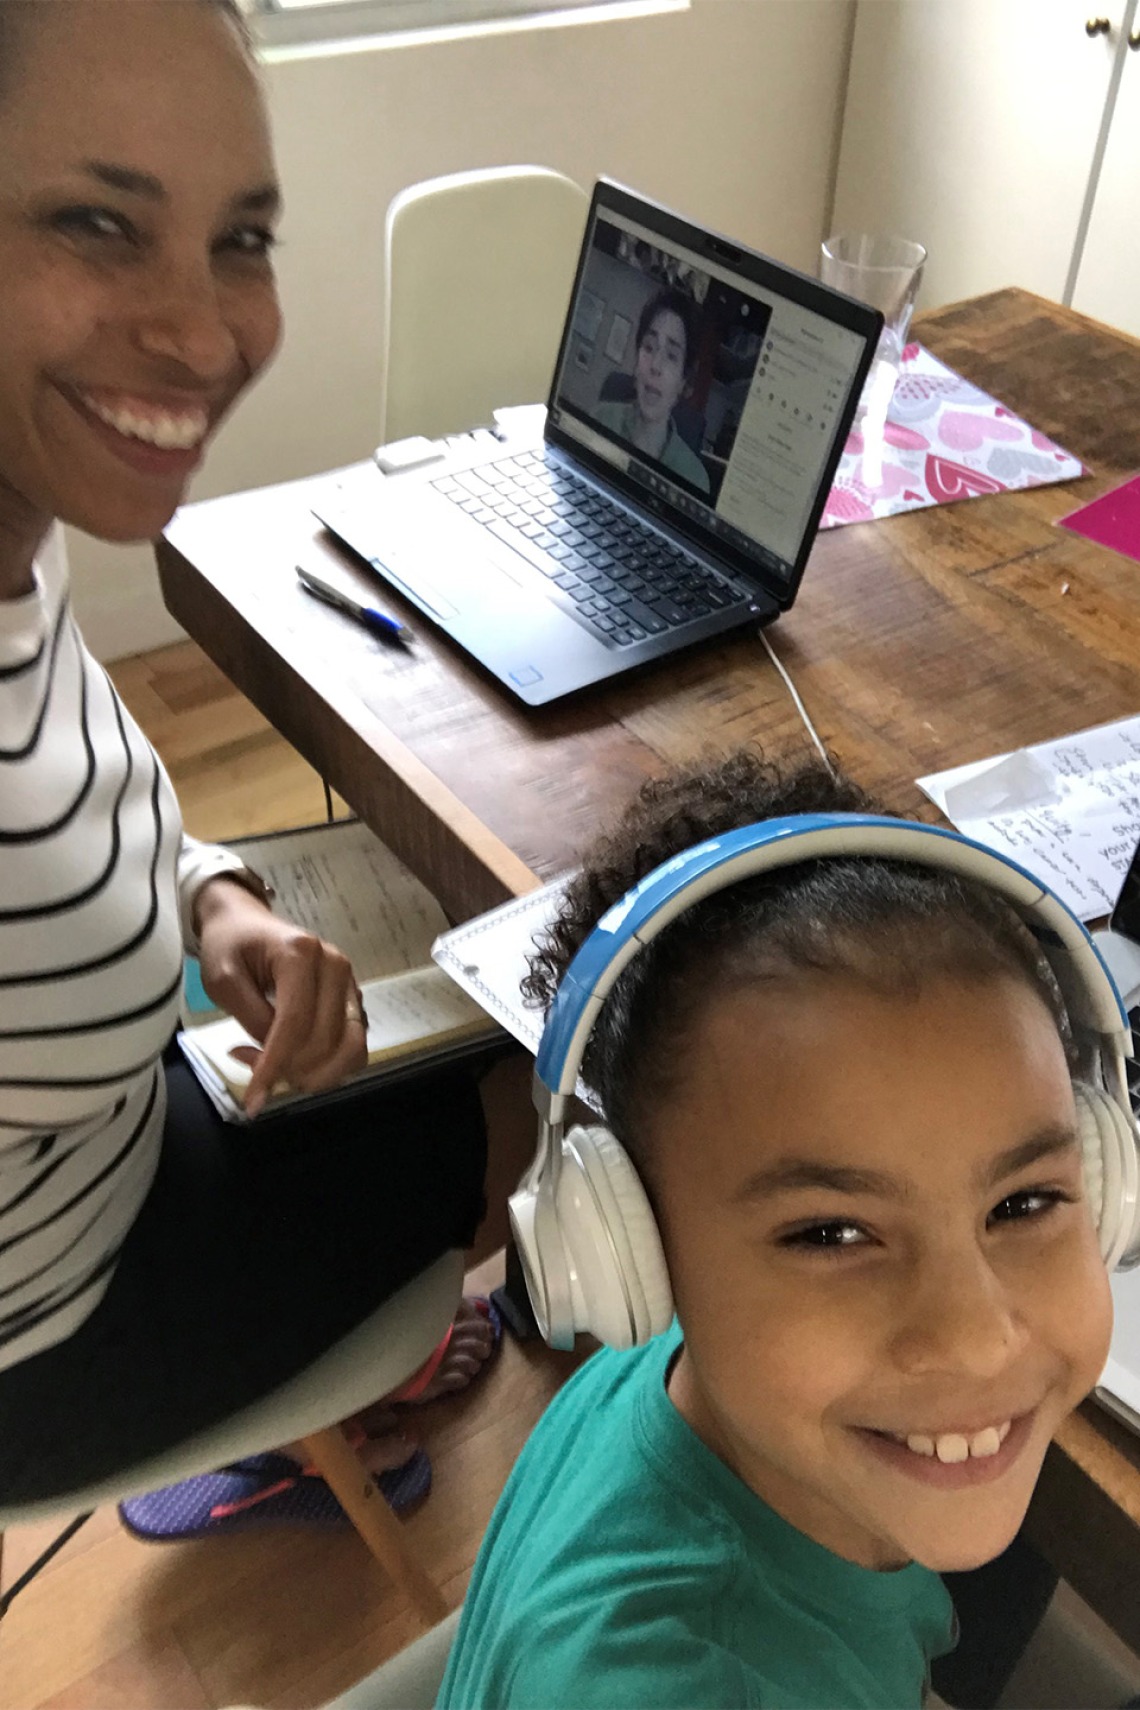 Allison Otu, executive director of corporate and community relations, poses for a photo with her daughter while working from home.